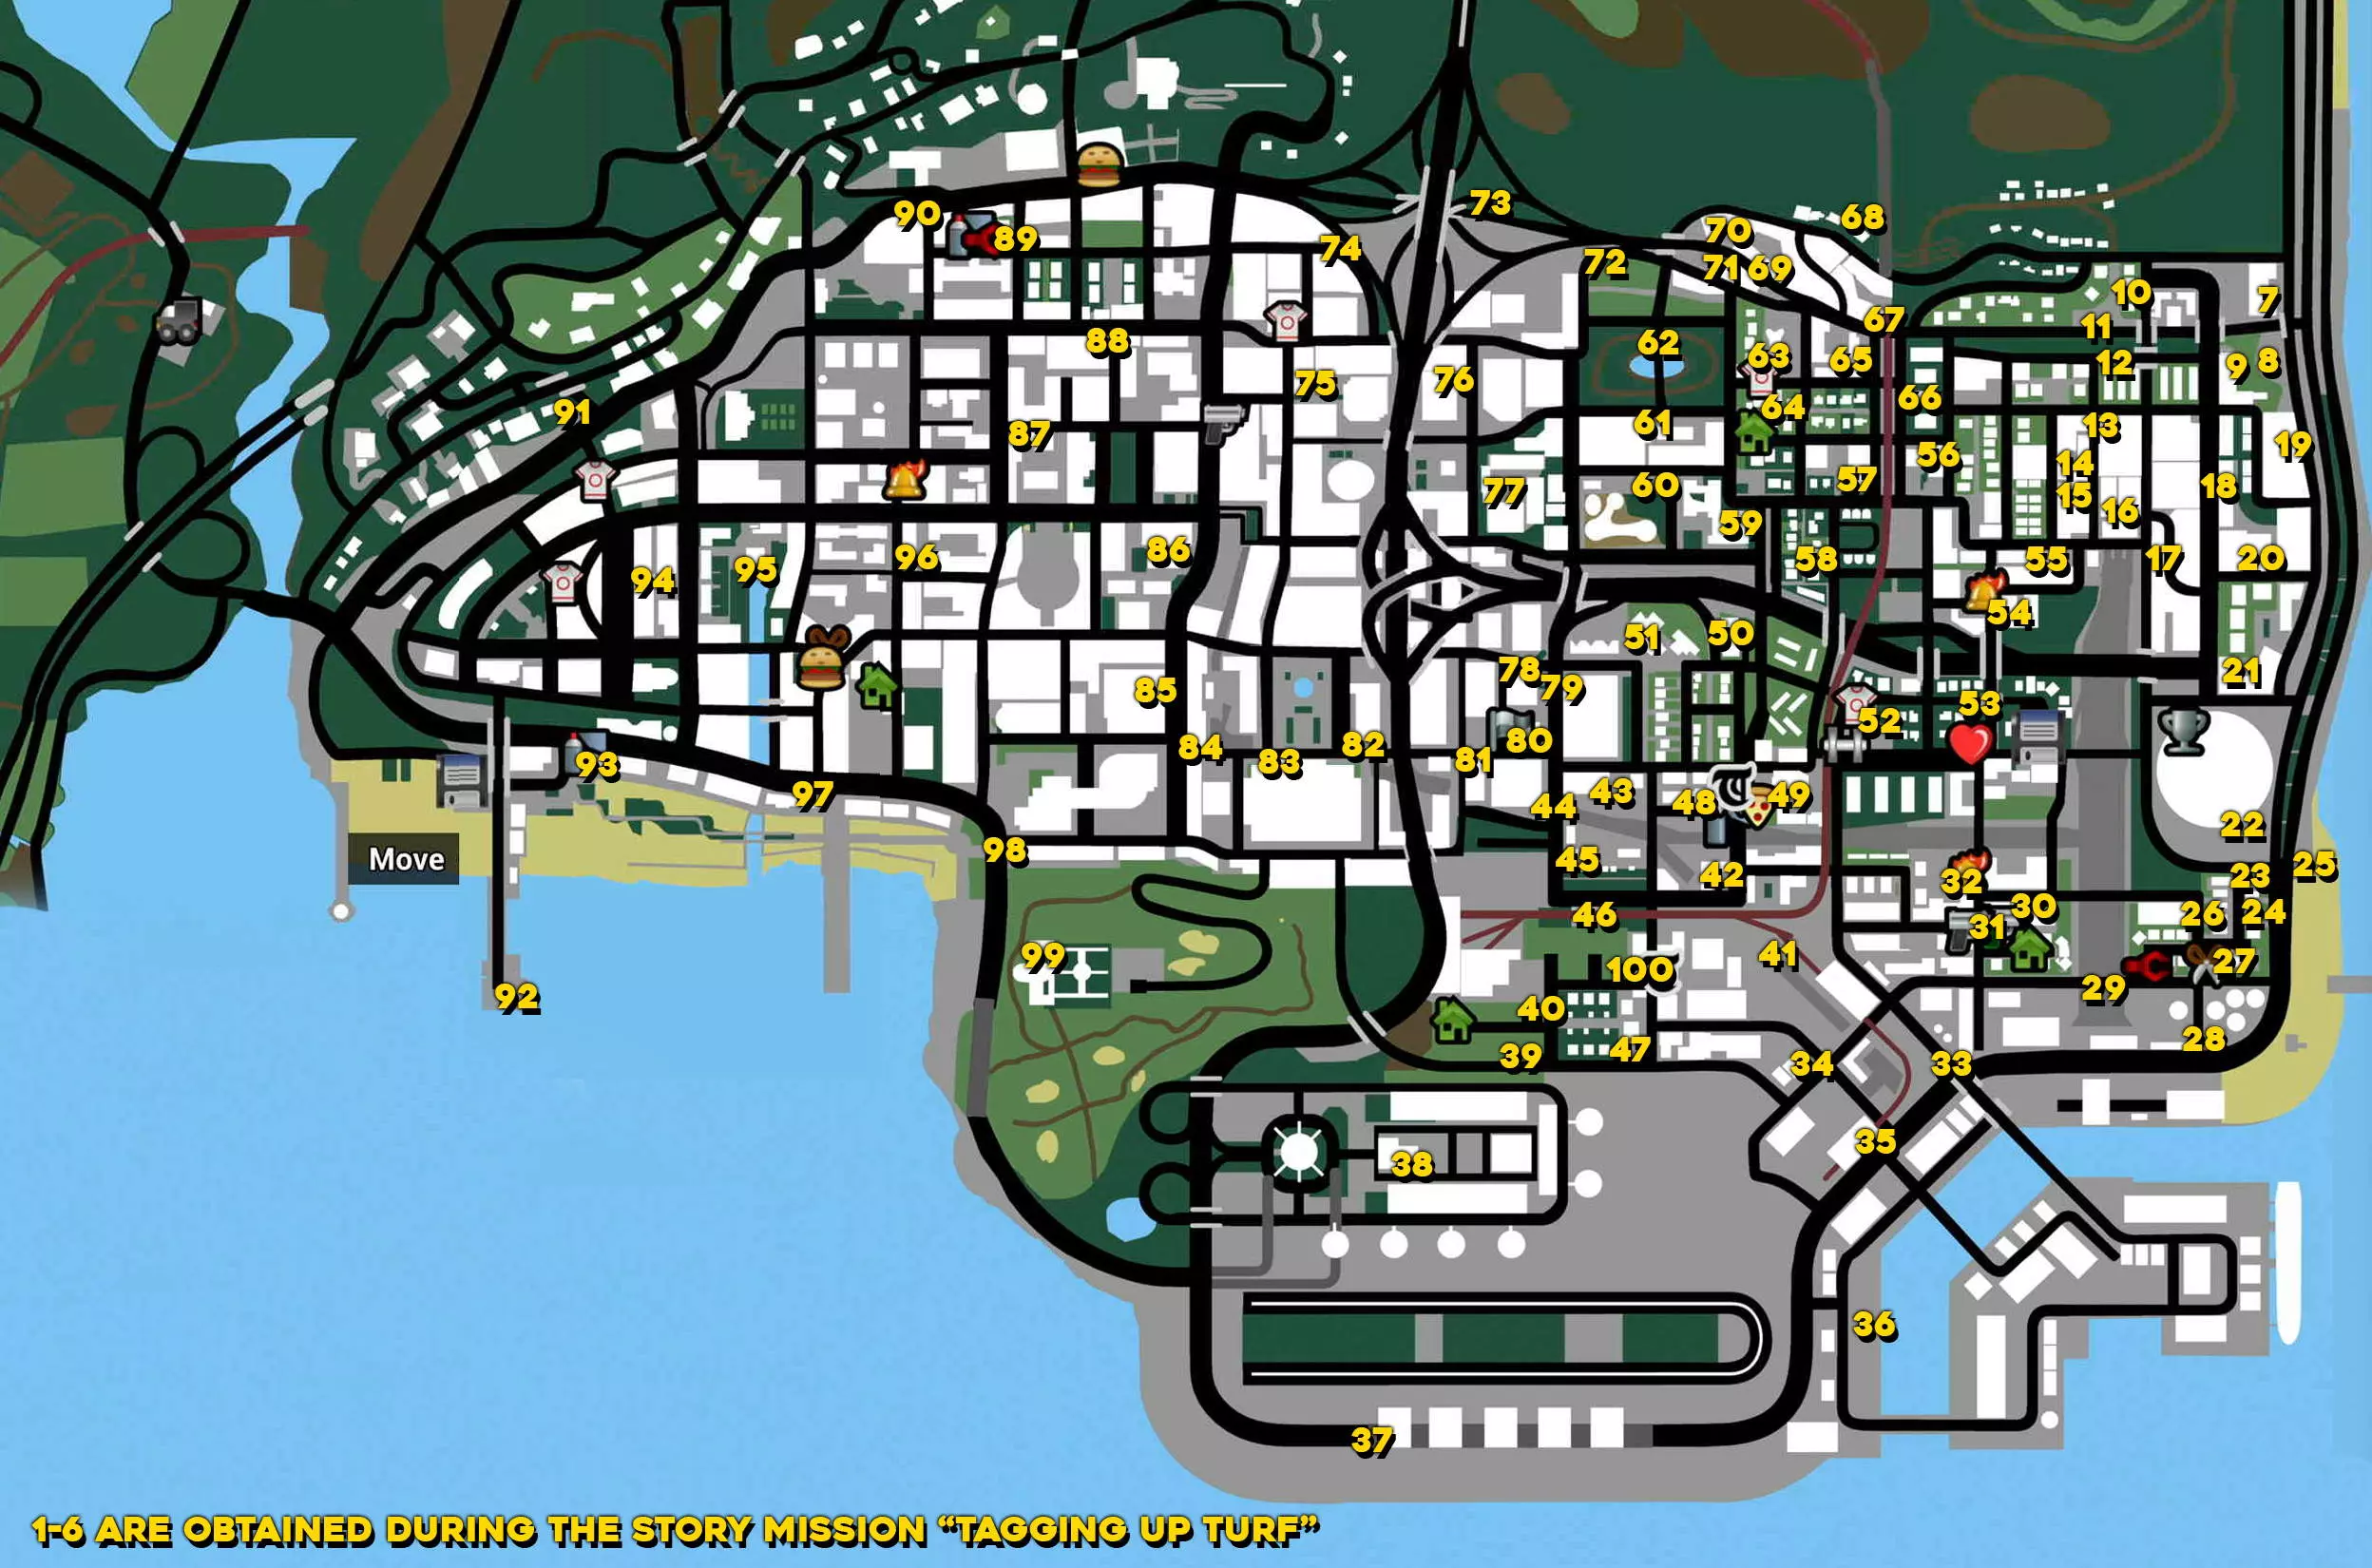 100% Completion in GTA San Andreas, GTA Wiki